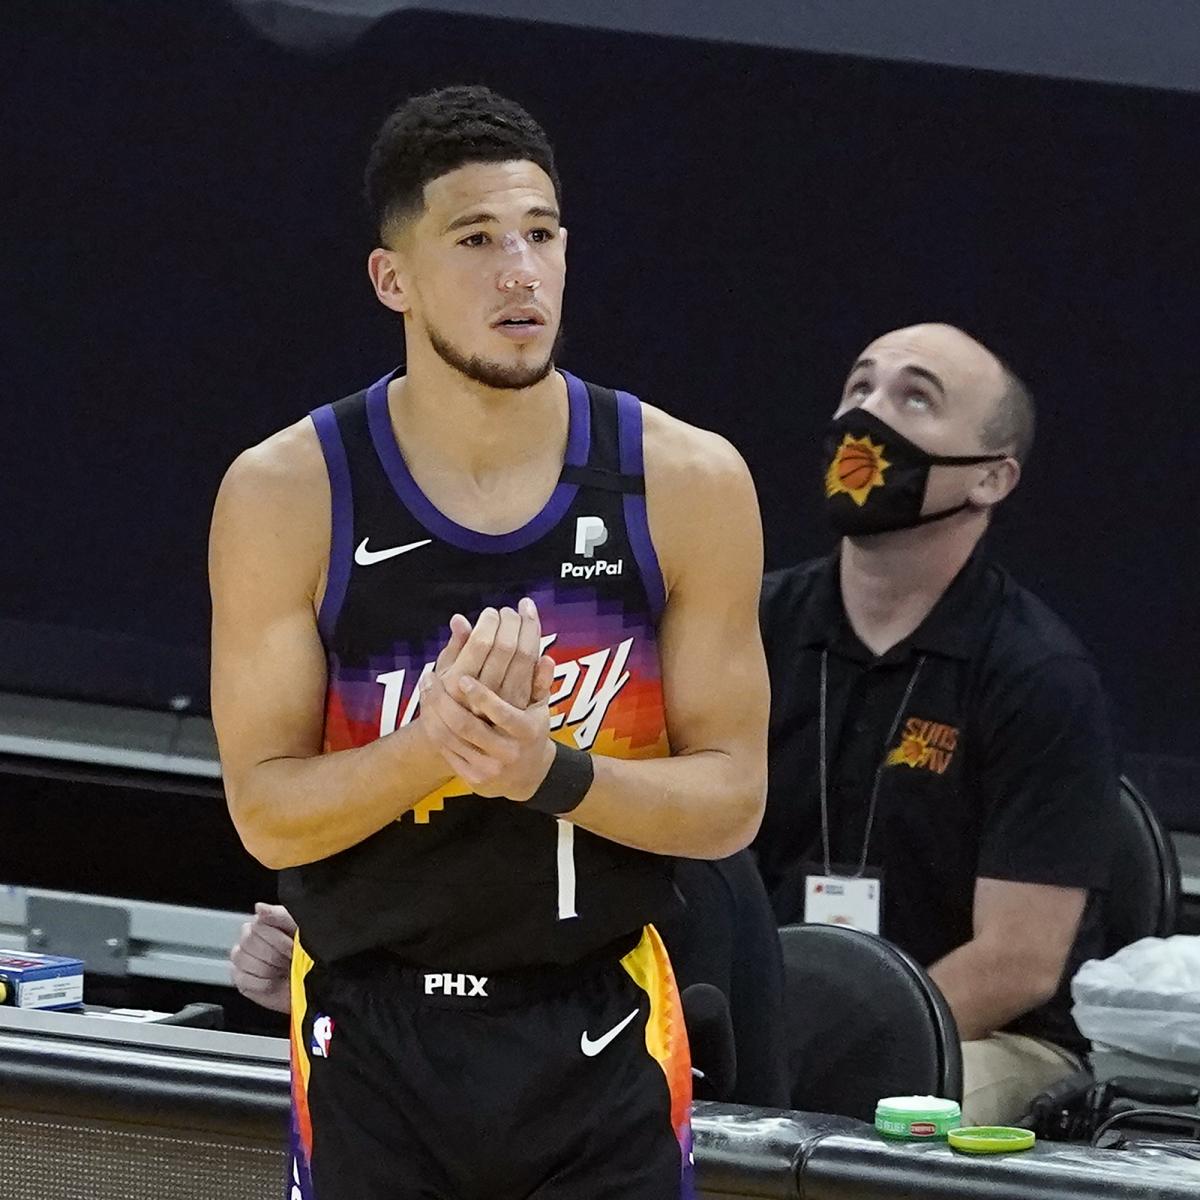 Suns’ Devin Booker Called Richard Hamilton for Advice on Playing with Conceal